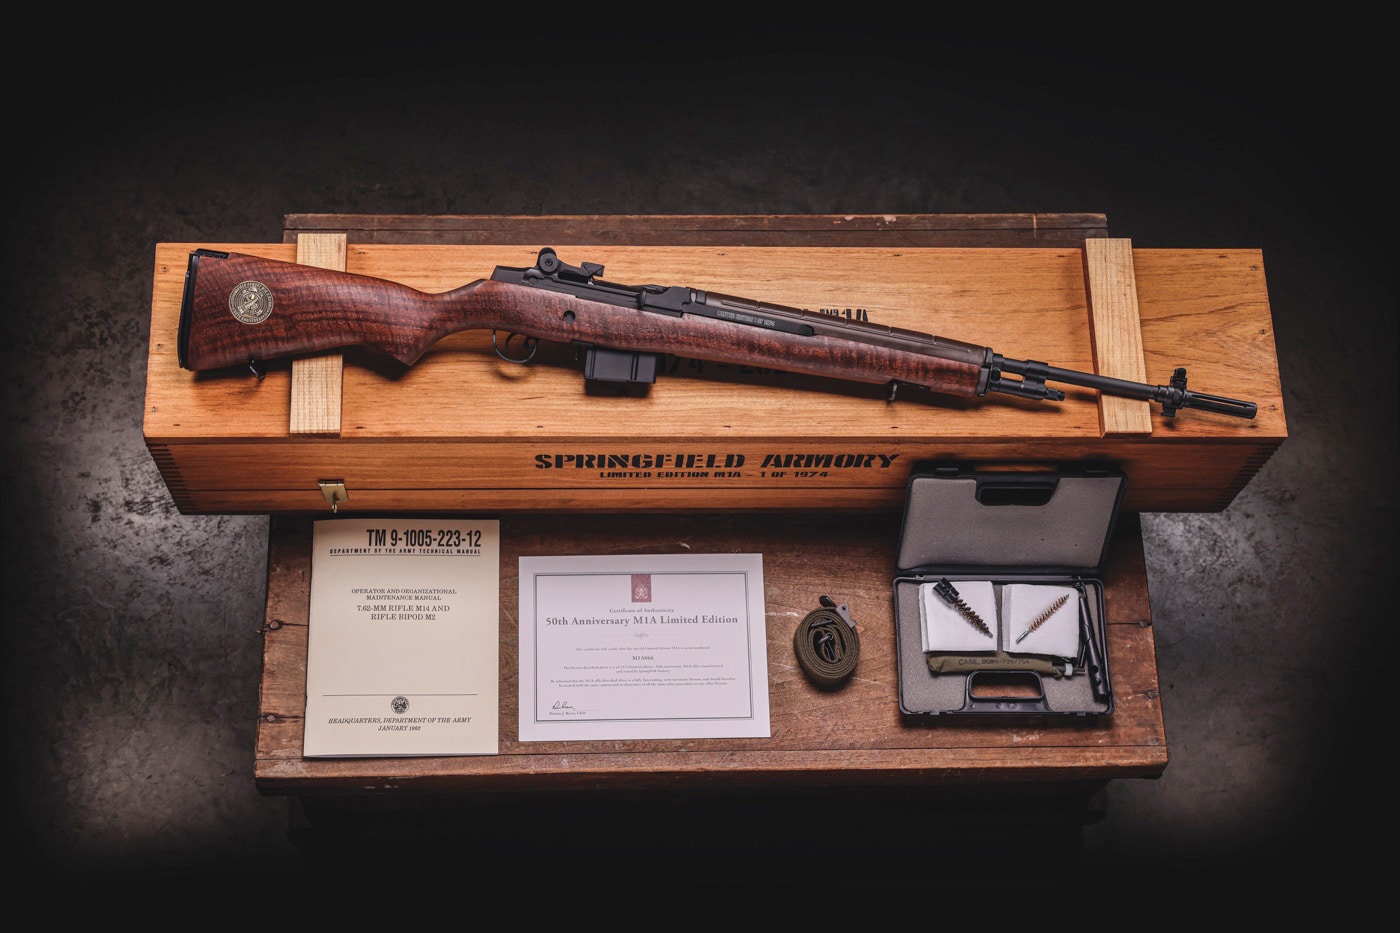 Limited Special Edition 50th Anniversary Springfield Armory M1A rifle presentaion accessories